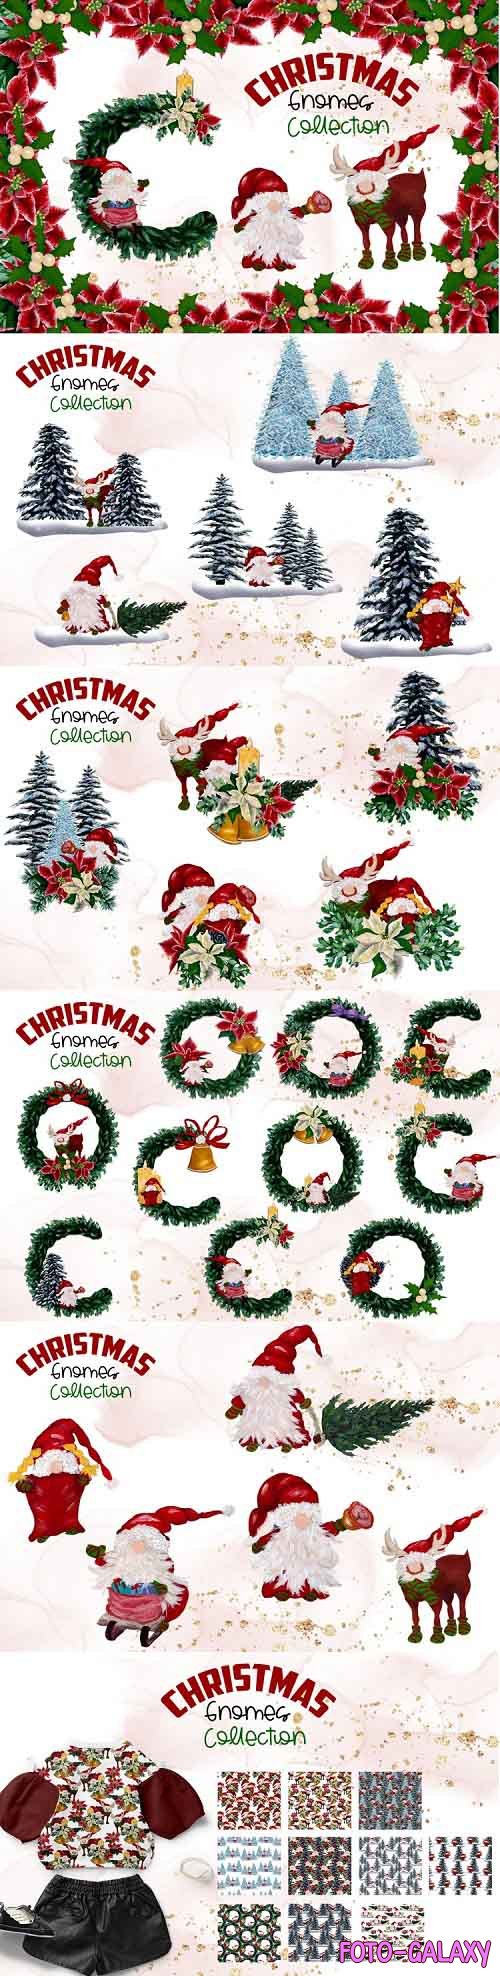 Watercolor Christmas Gnomes Collection - 1028533